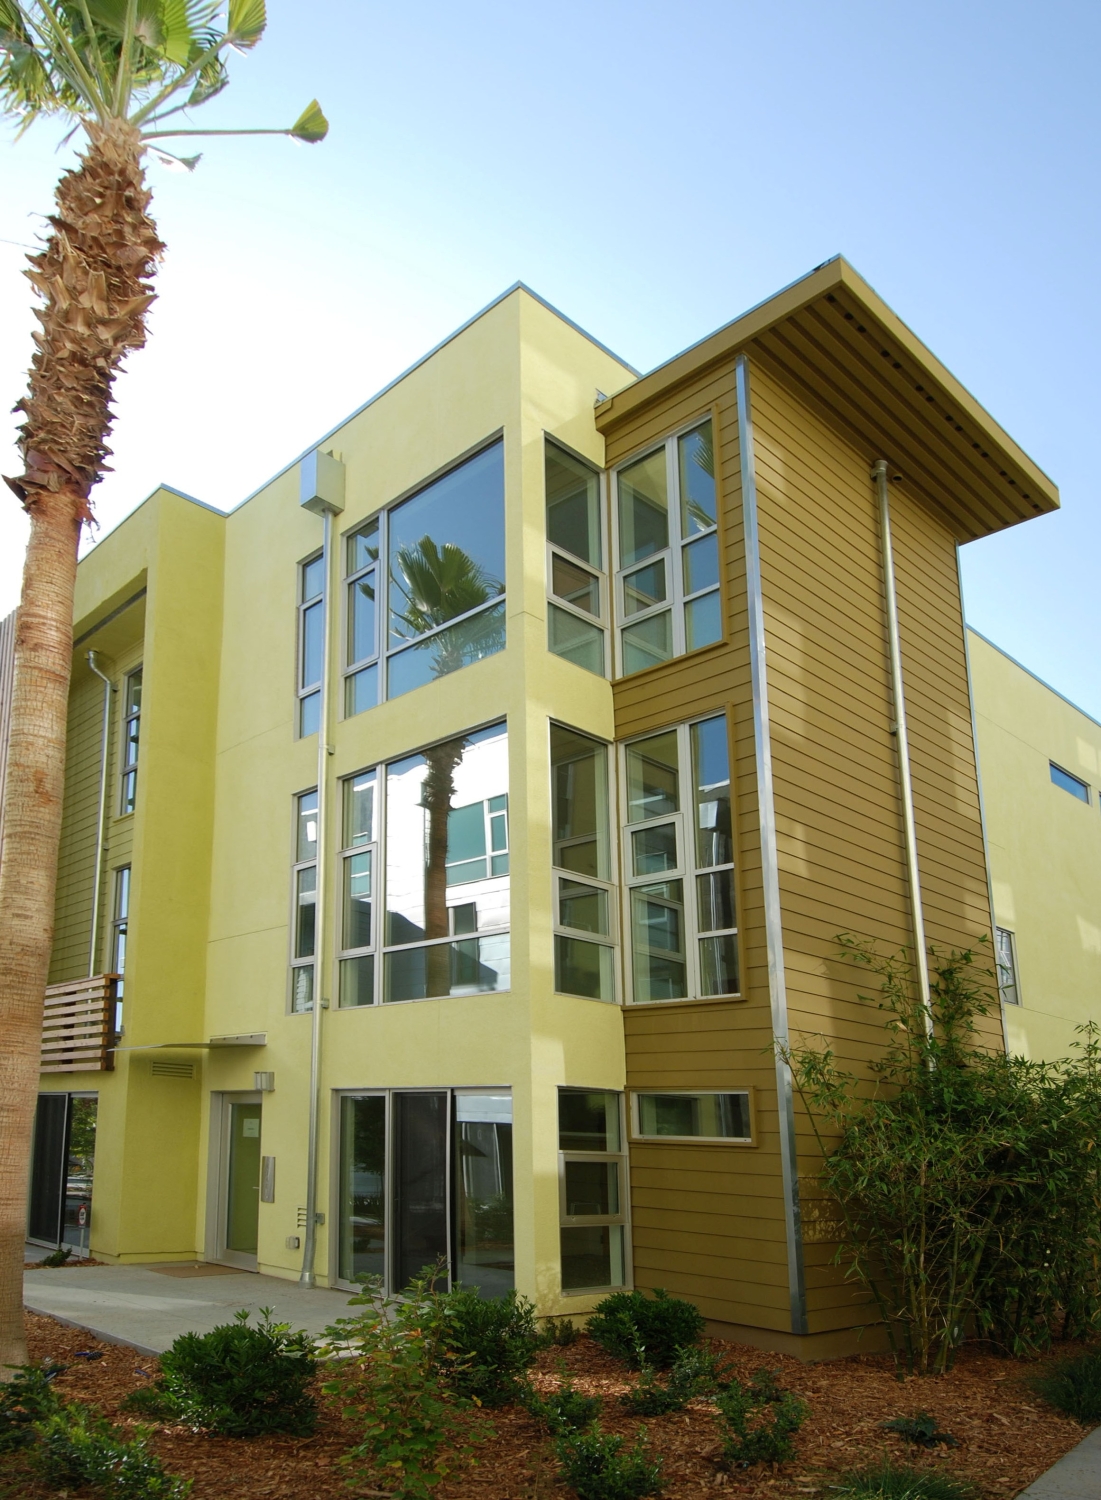 Exterior view of one of the townhouses at Blue Star Corner in Emeryville, Ca.